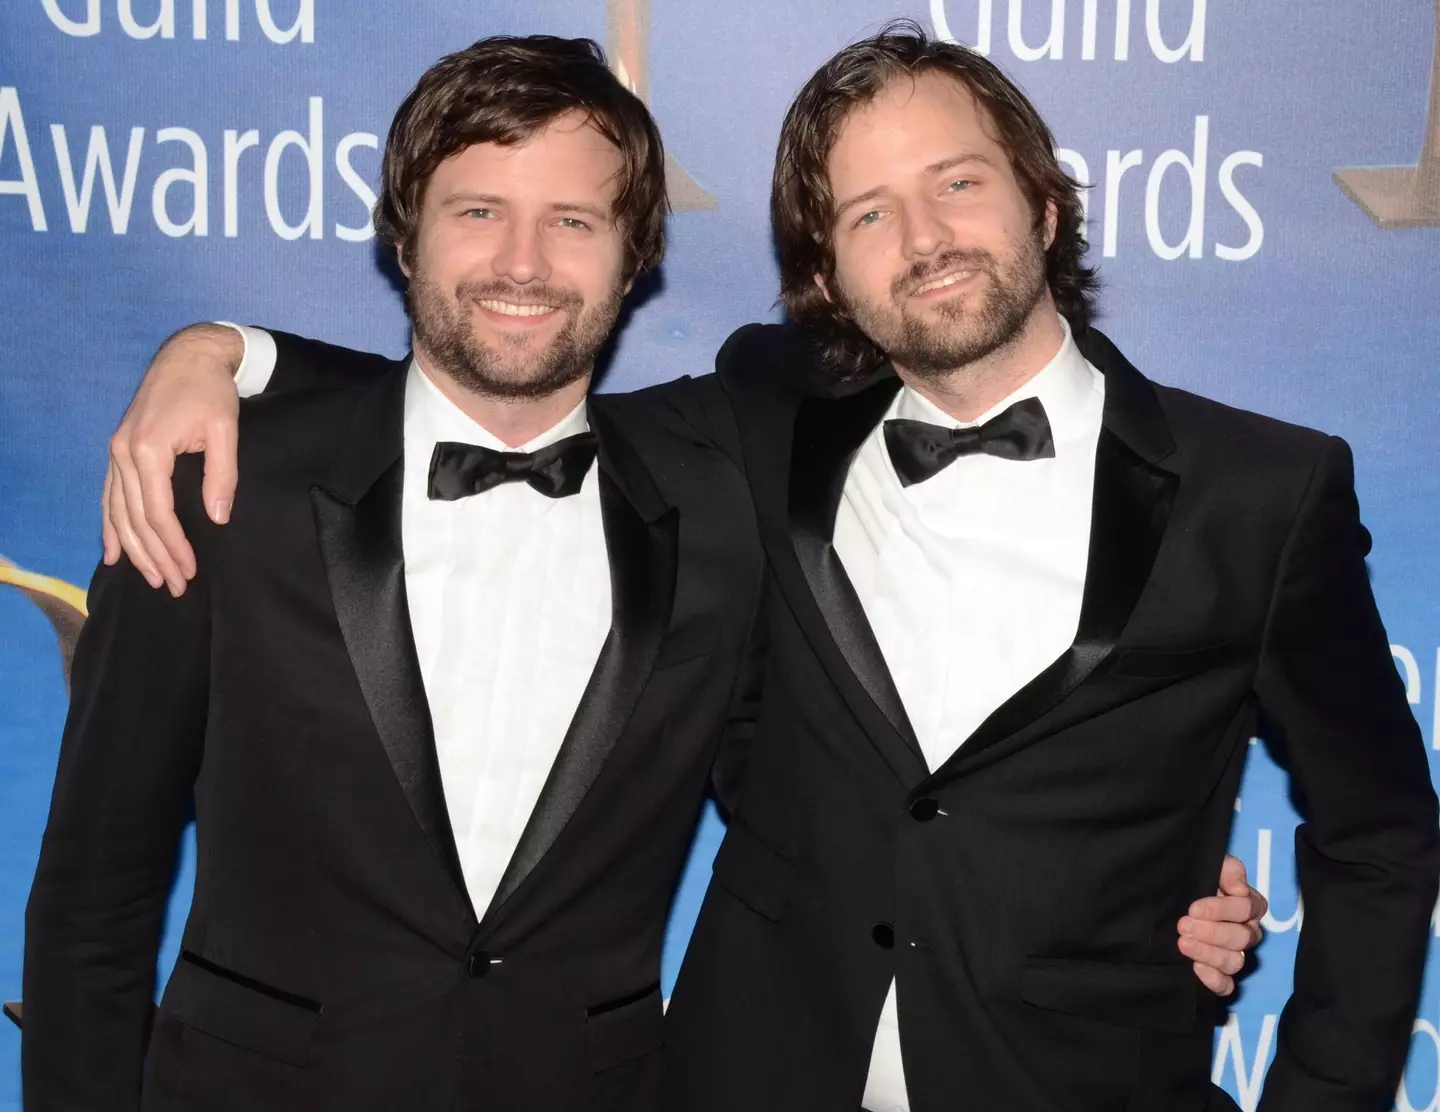 The Duffer Brothers revealed they have rectified continuity errors in old episodes.